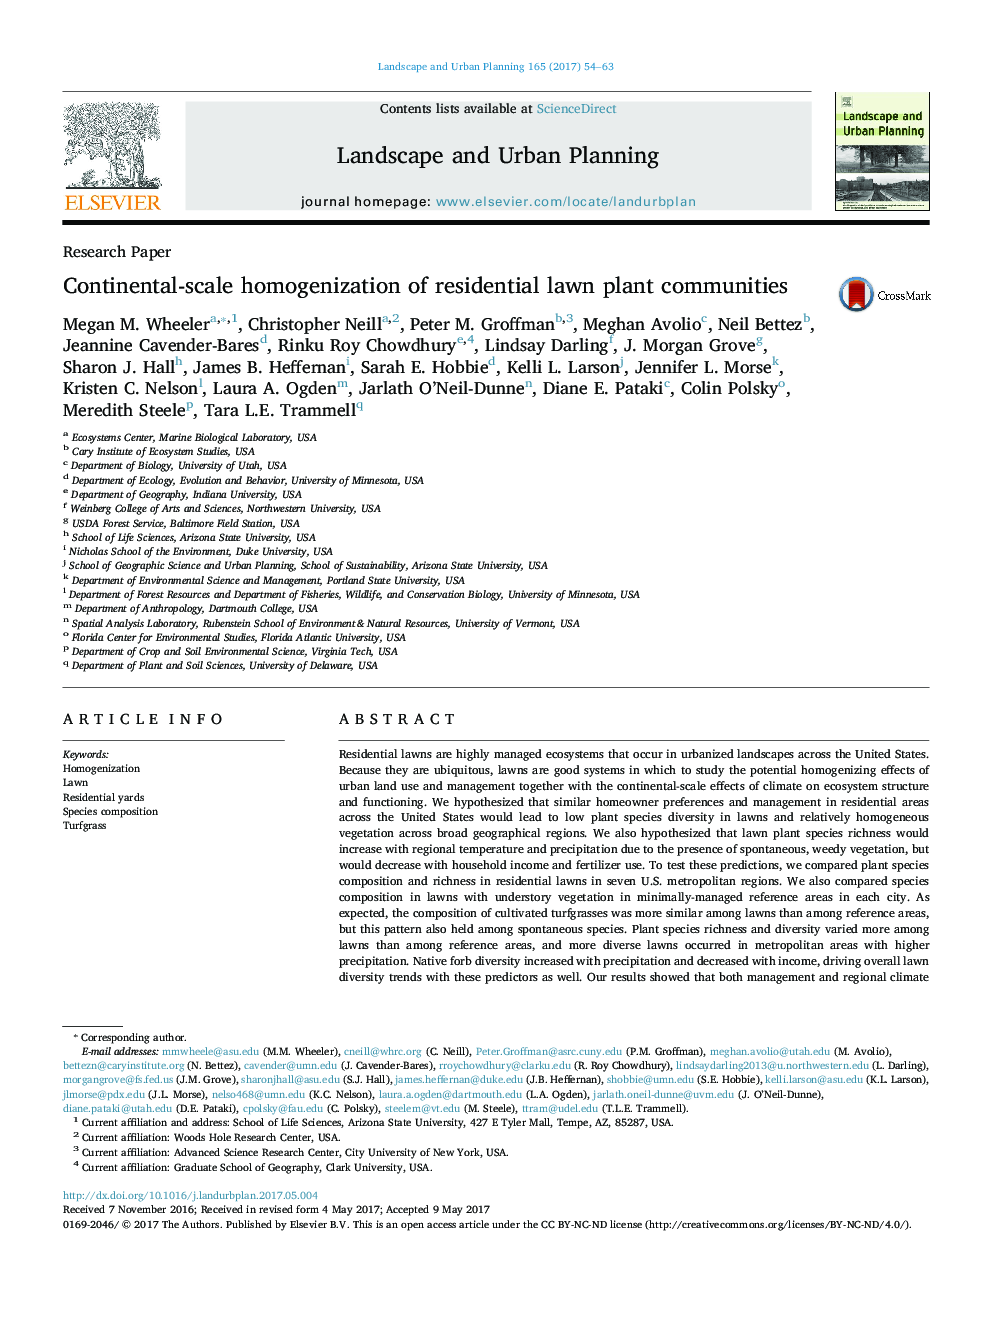 Continental-scale homogenization of residential lawn plant communities